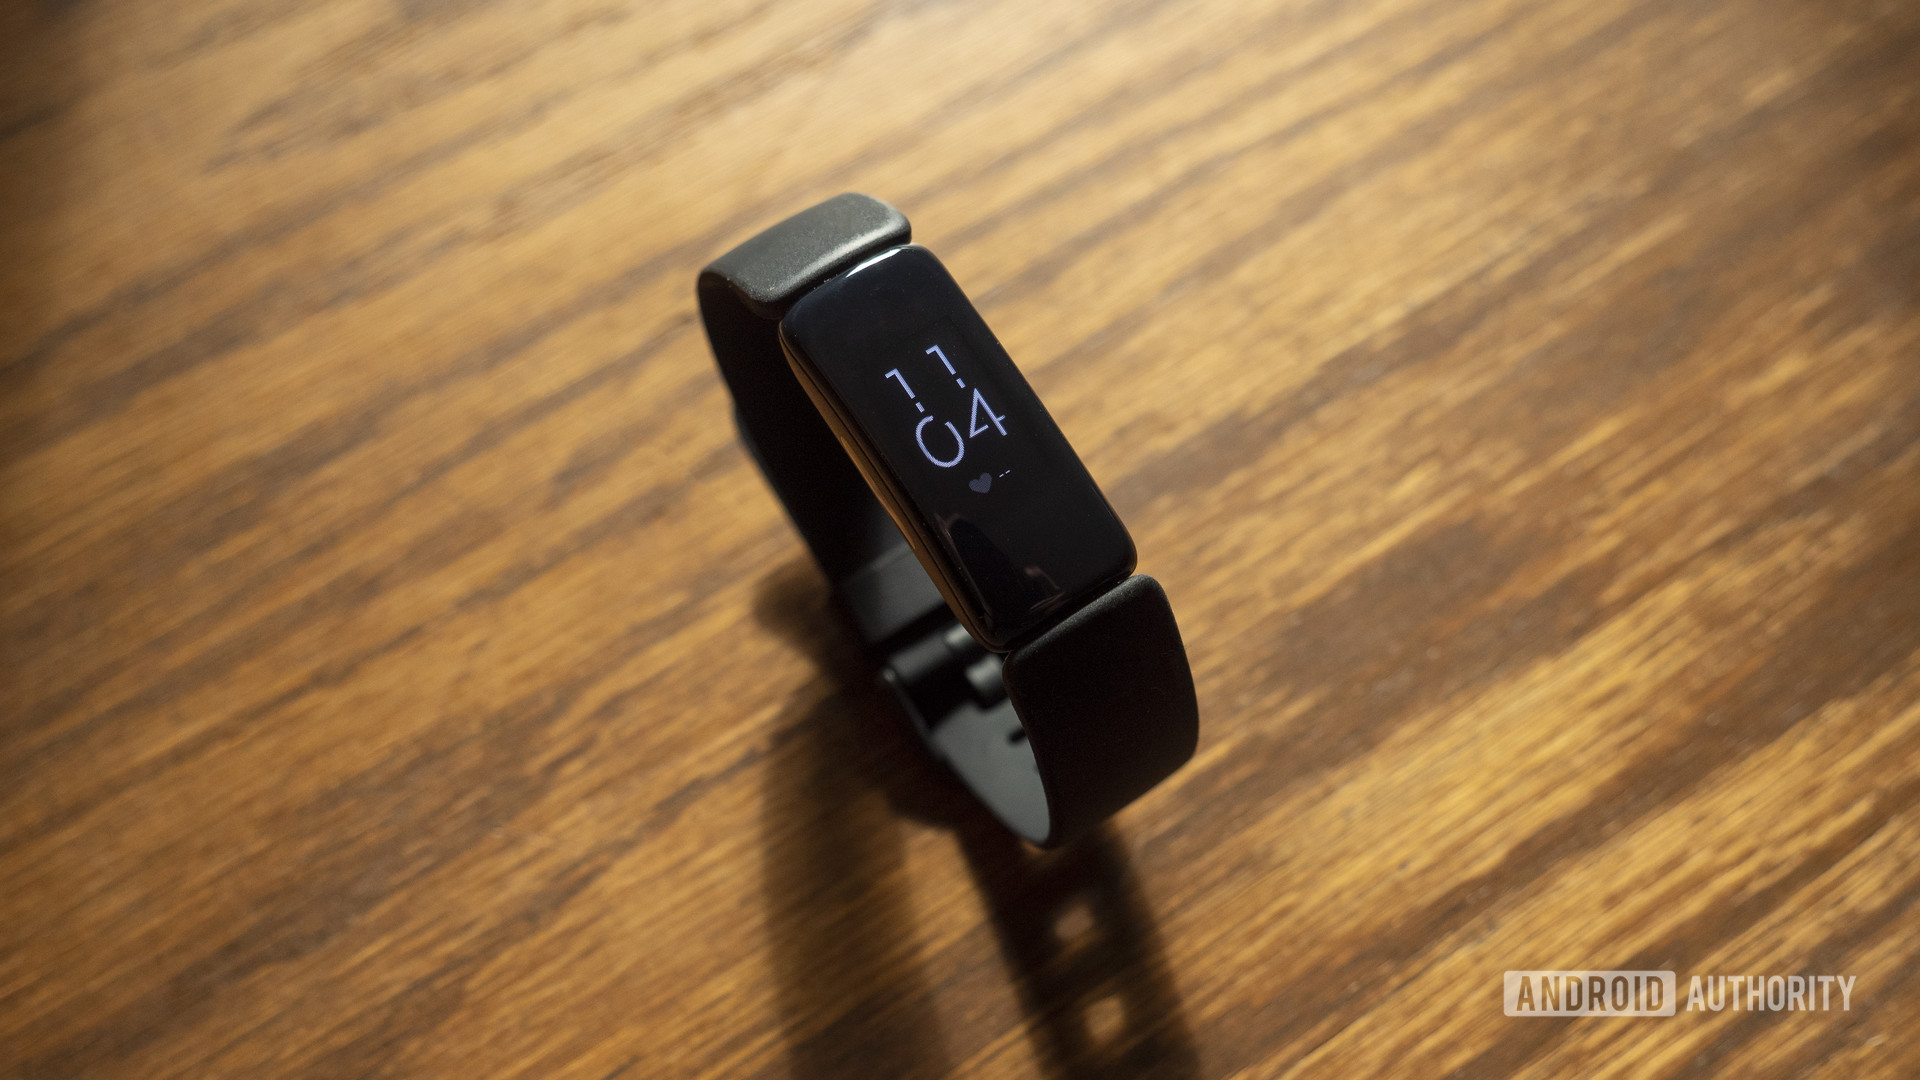 A Fitbit Inspire 2 fitness tracker displays the time while resting on a wooden table.